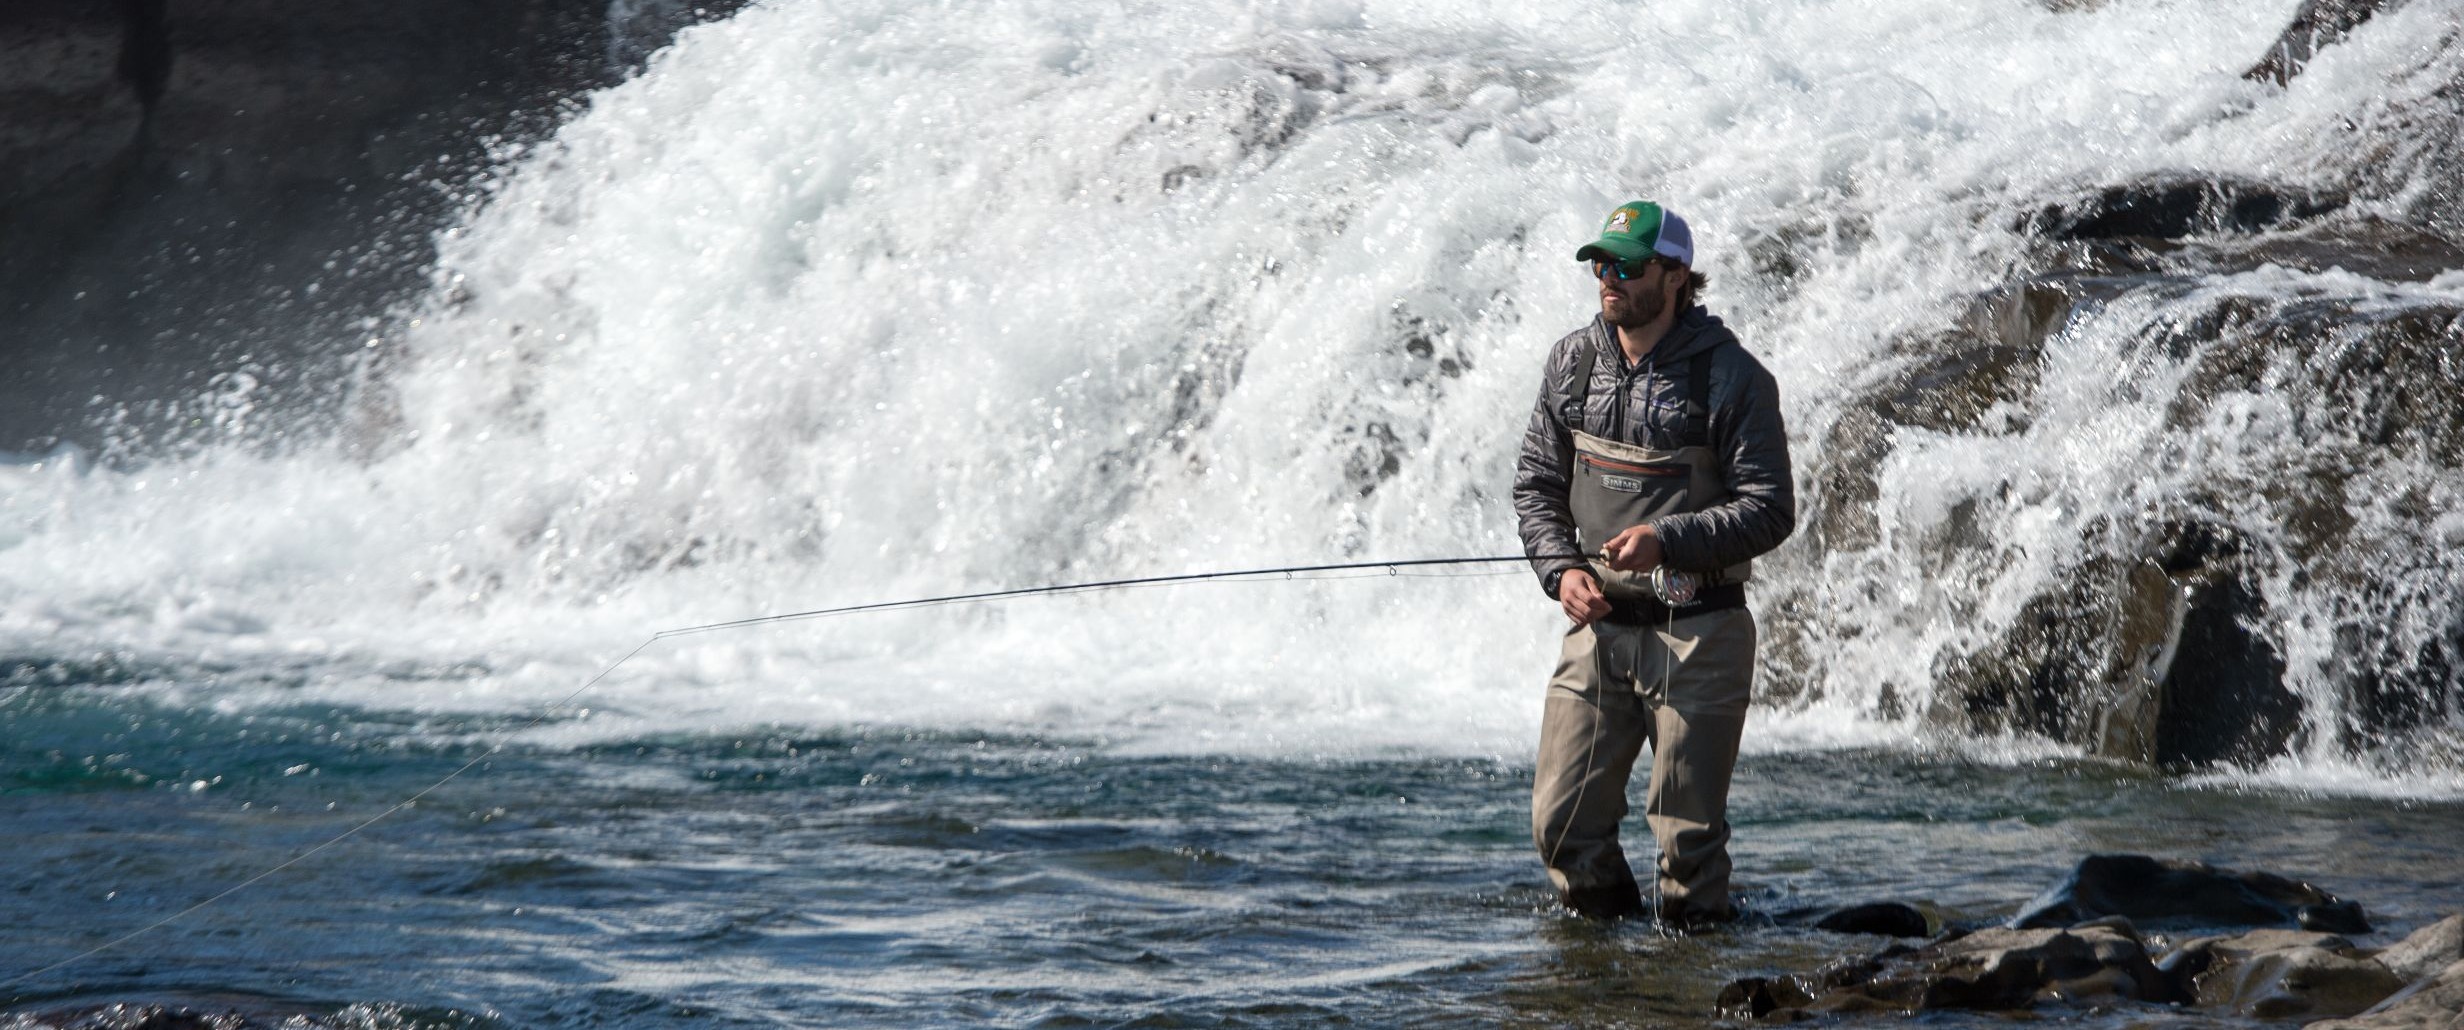 Fly Line Accessories - Line & Leader - Alaska Fly Fishing Goods